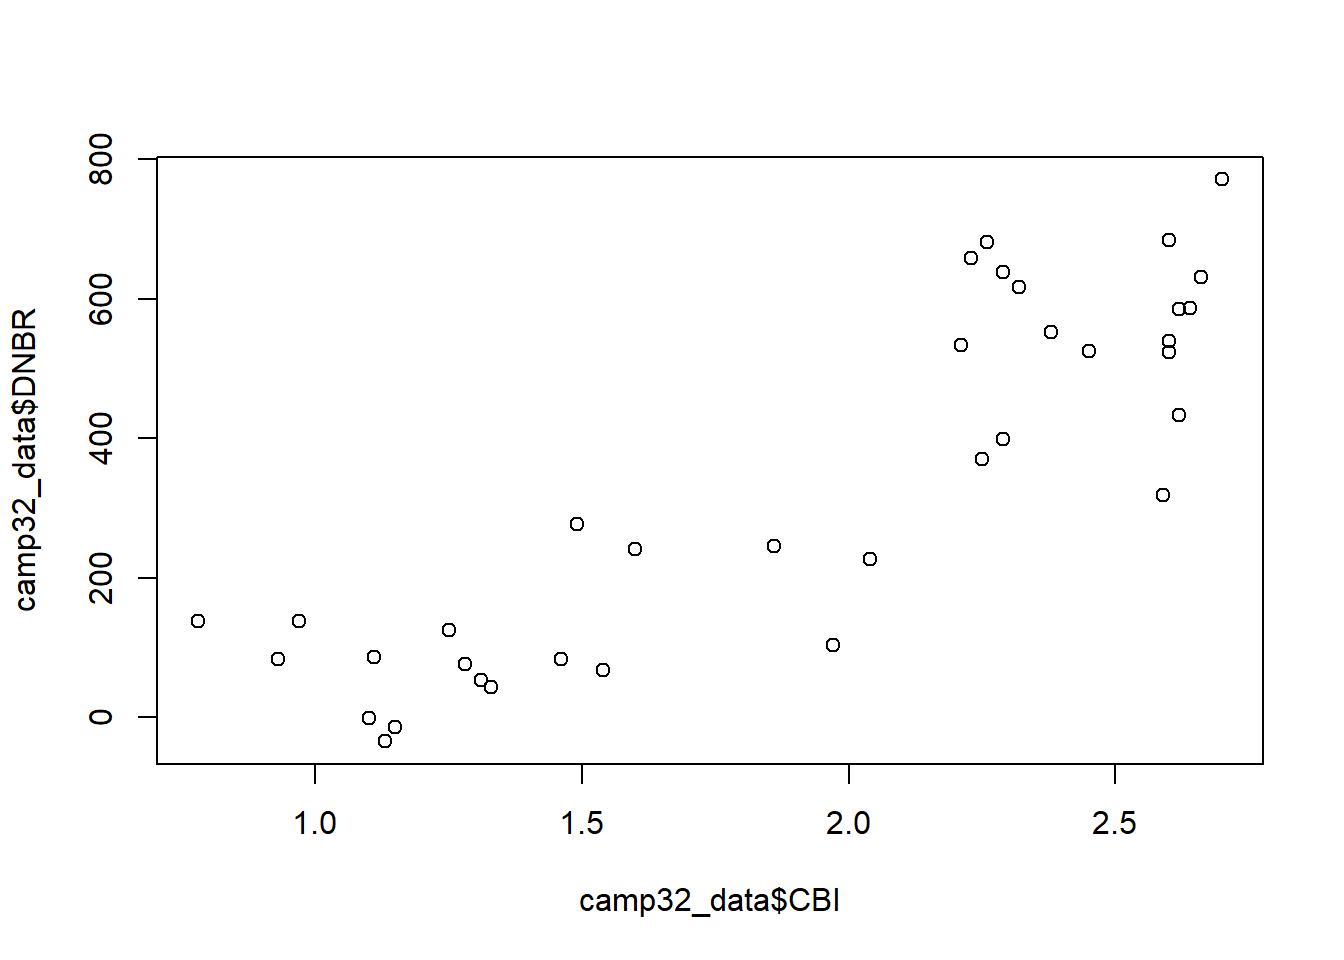 Scatterplot of the CBI and DNBR fire severity indices.